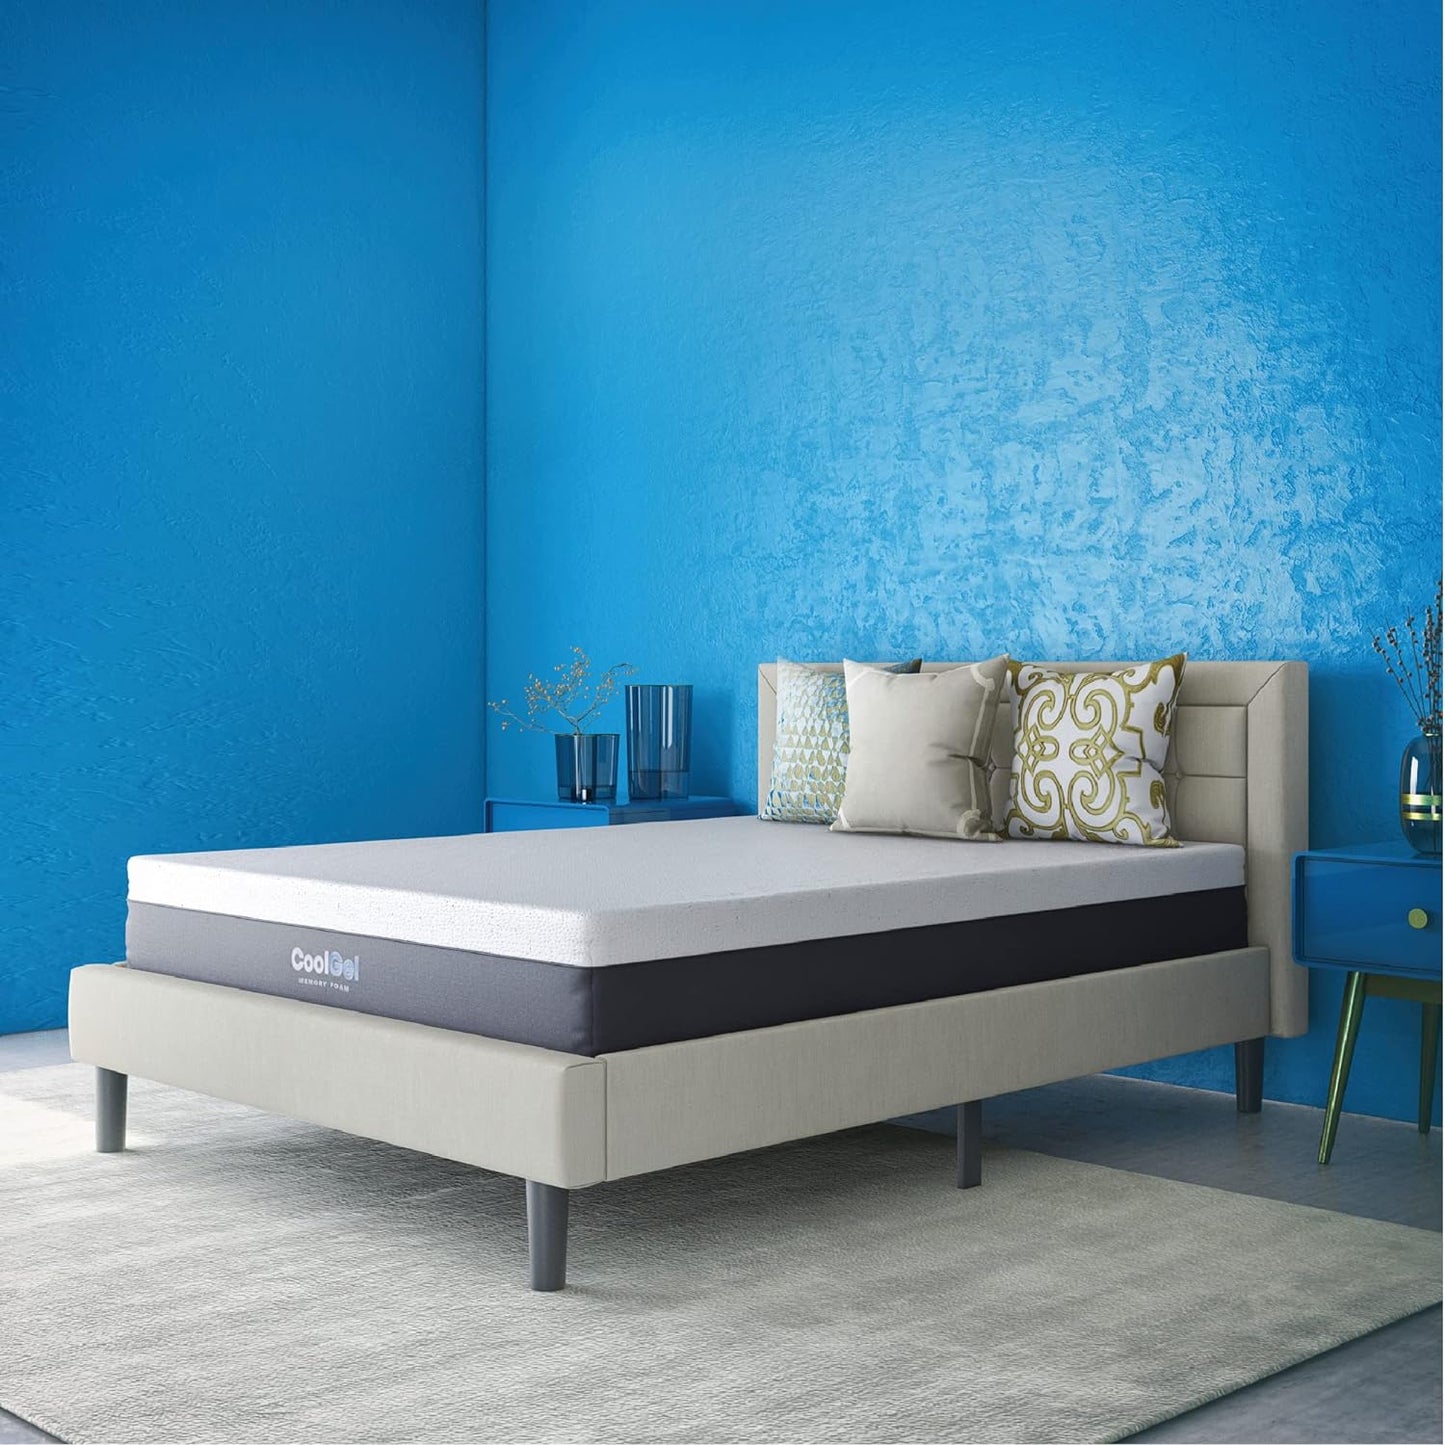 12-Inch Ventilated Memory Foam Mattress | CertiPUR-US Certified | King Size Bed-in-a-Box